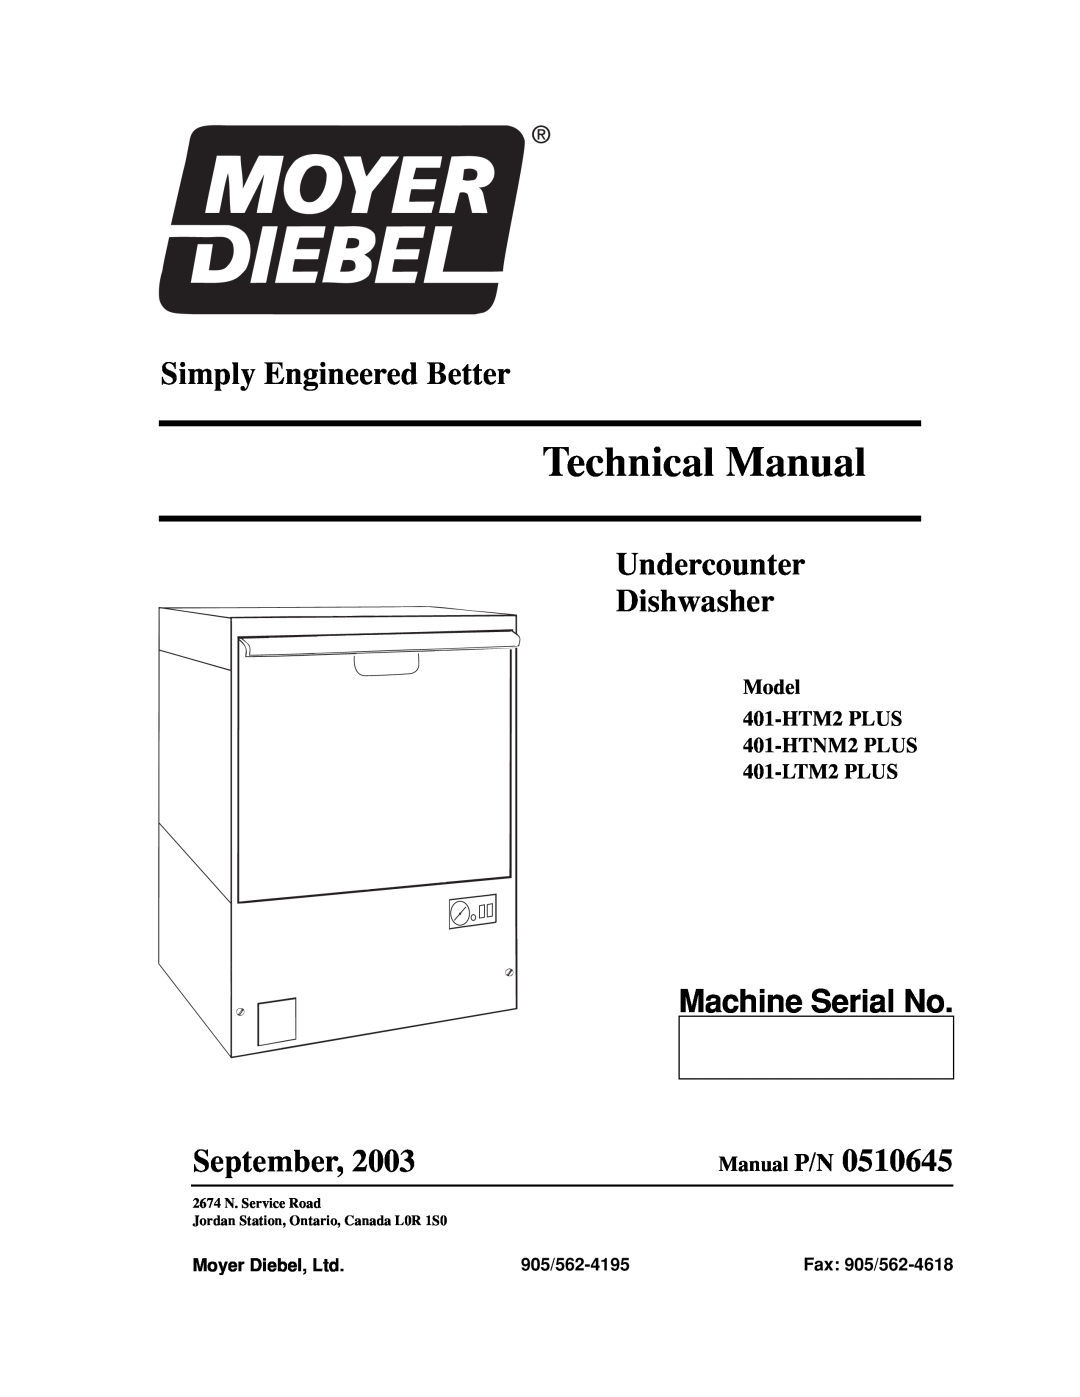 Moyer Diebel 401-LTM2 PLUS technical manual Machine Serial No, Technical Manual, Simply Engineered Better, September 